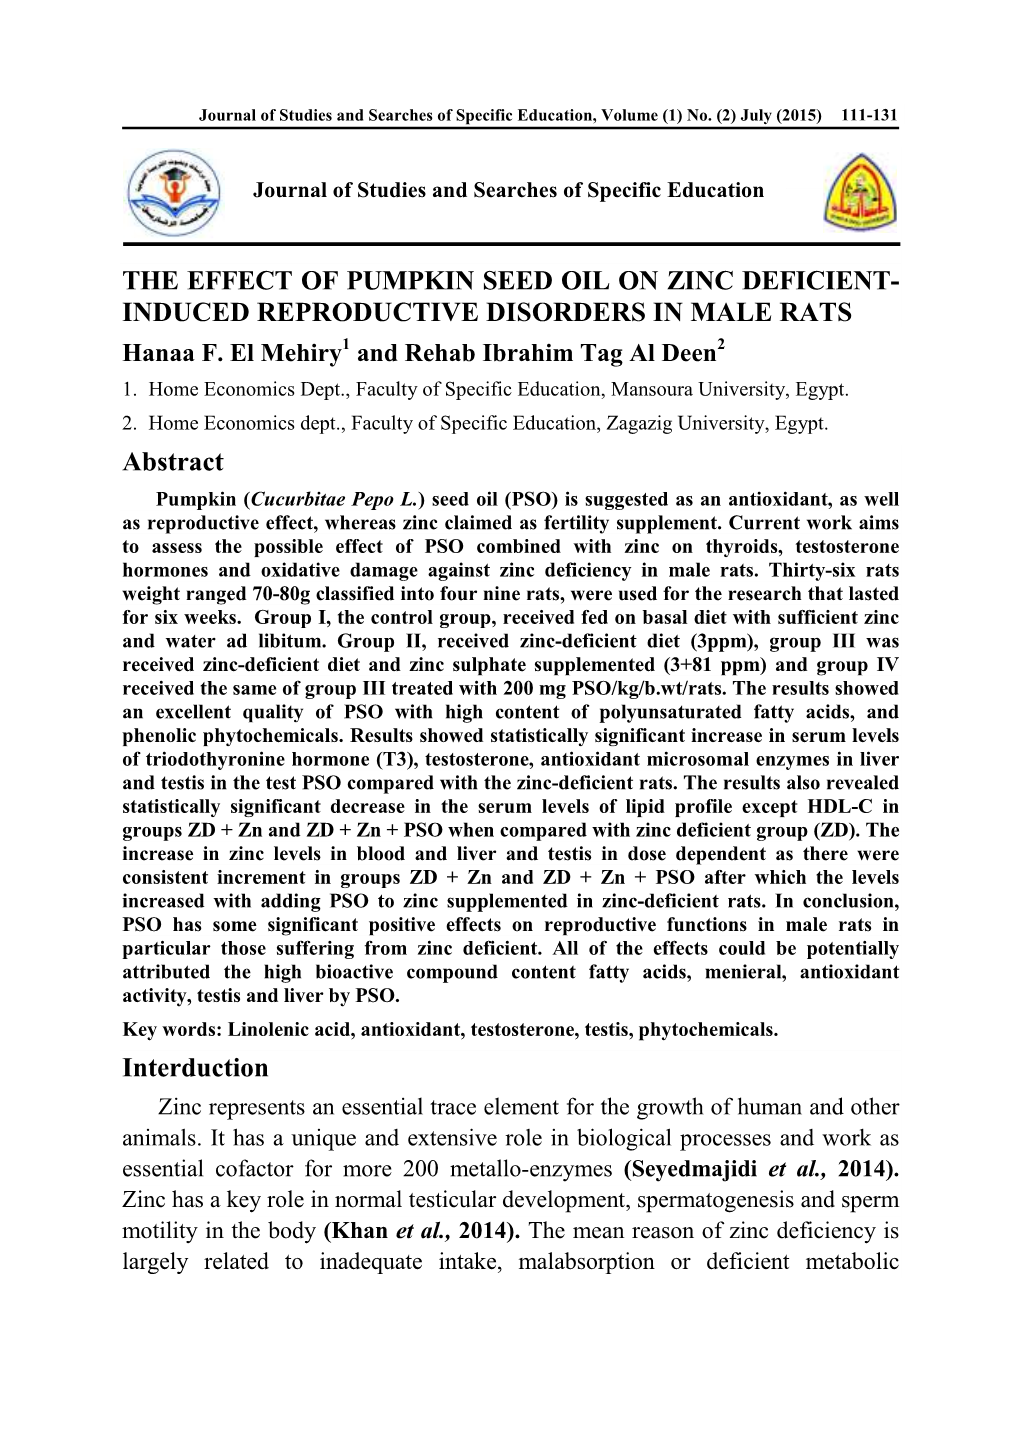 The Effect of Pumpkin Seed Oil on Zinc Deficient- Induced